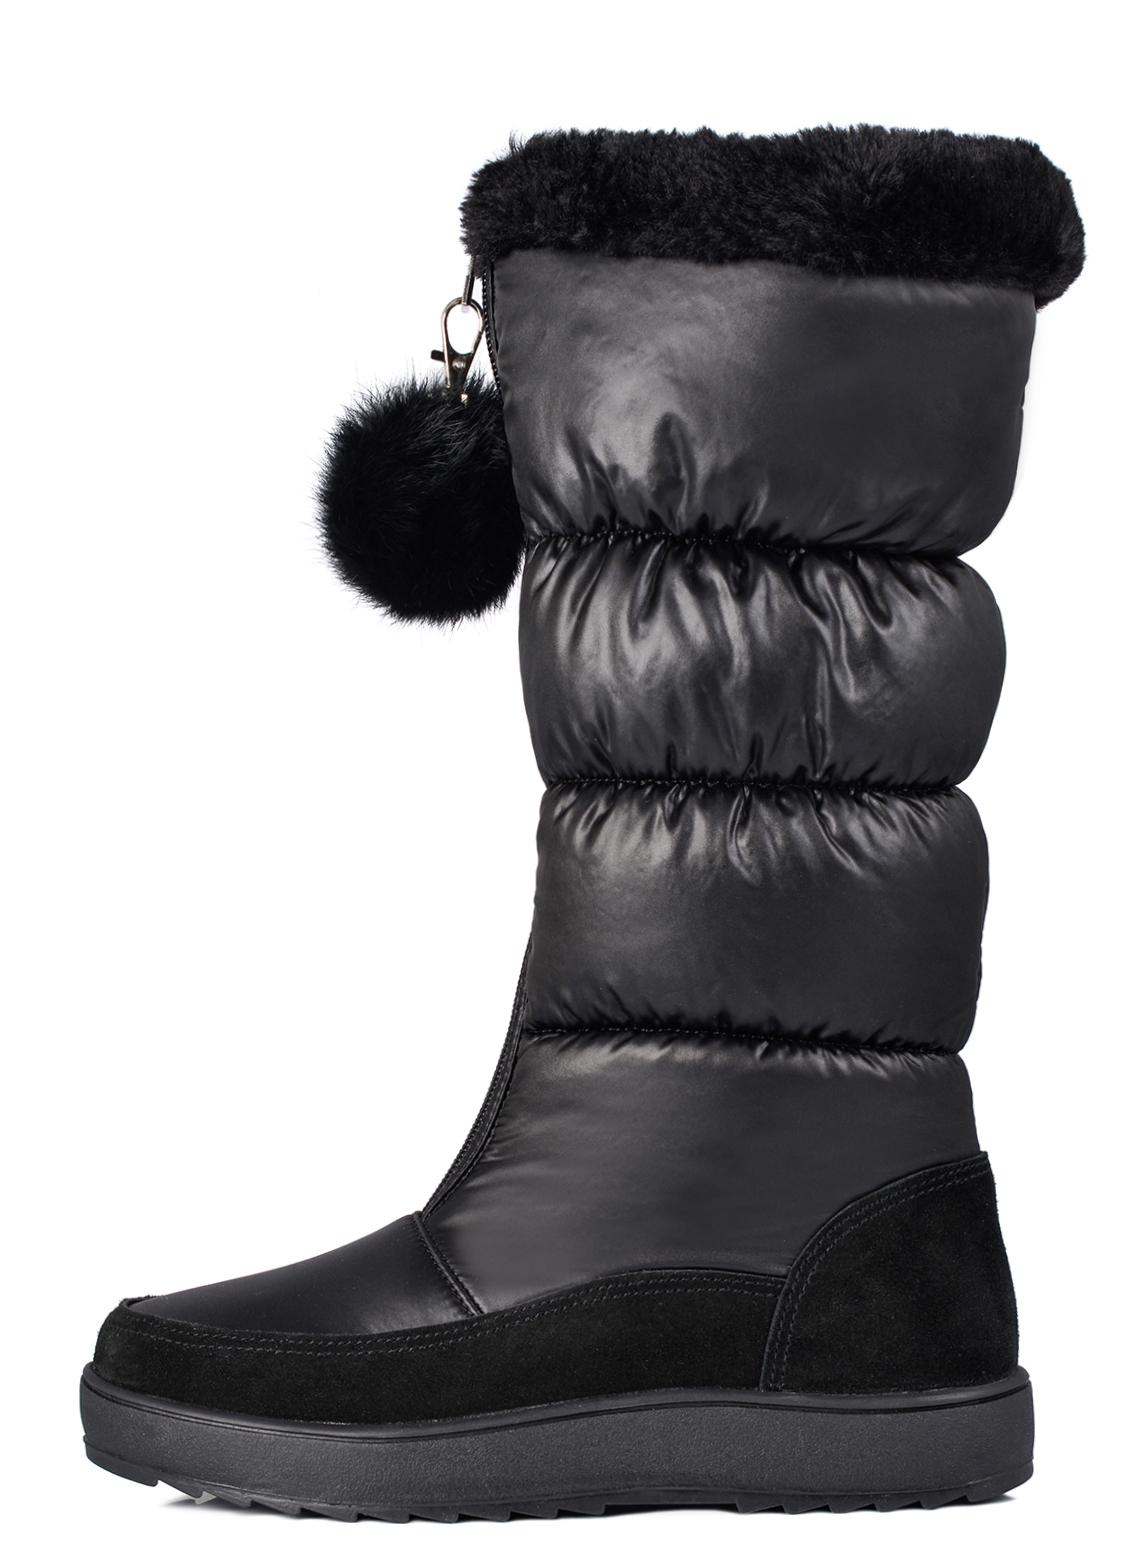 KUIPER WOMEN shoes for WOMENS - Winter Boots shoes